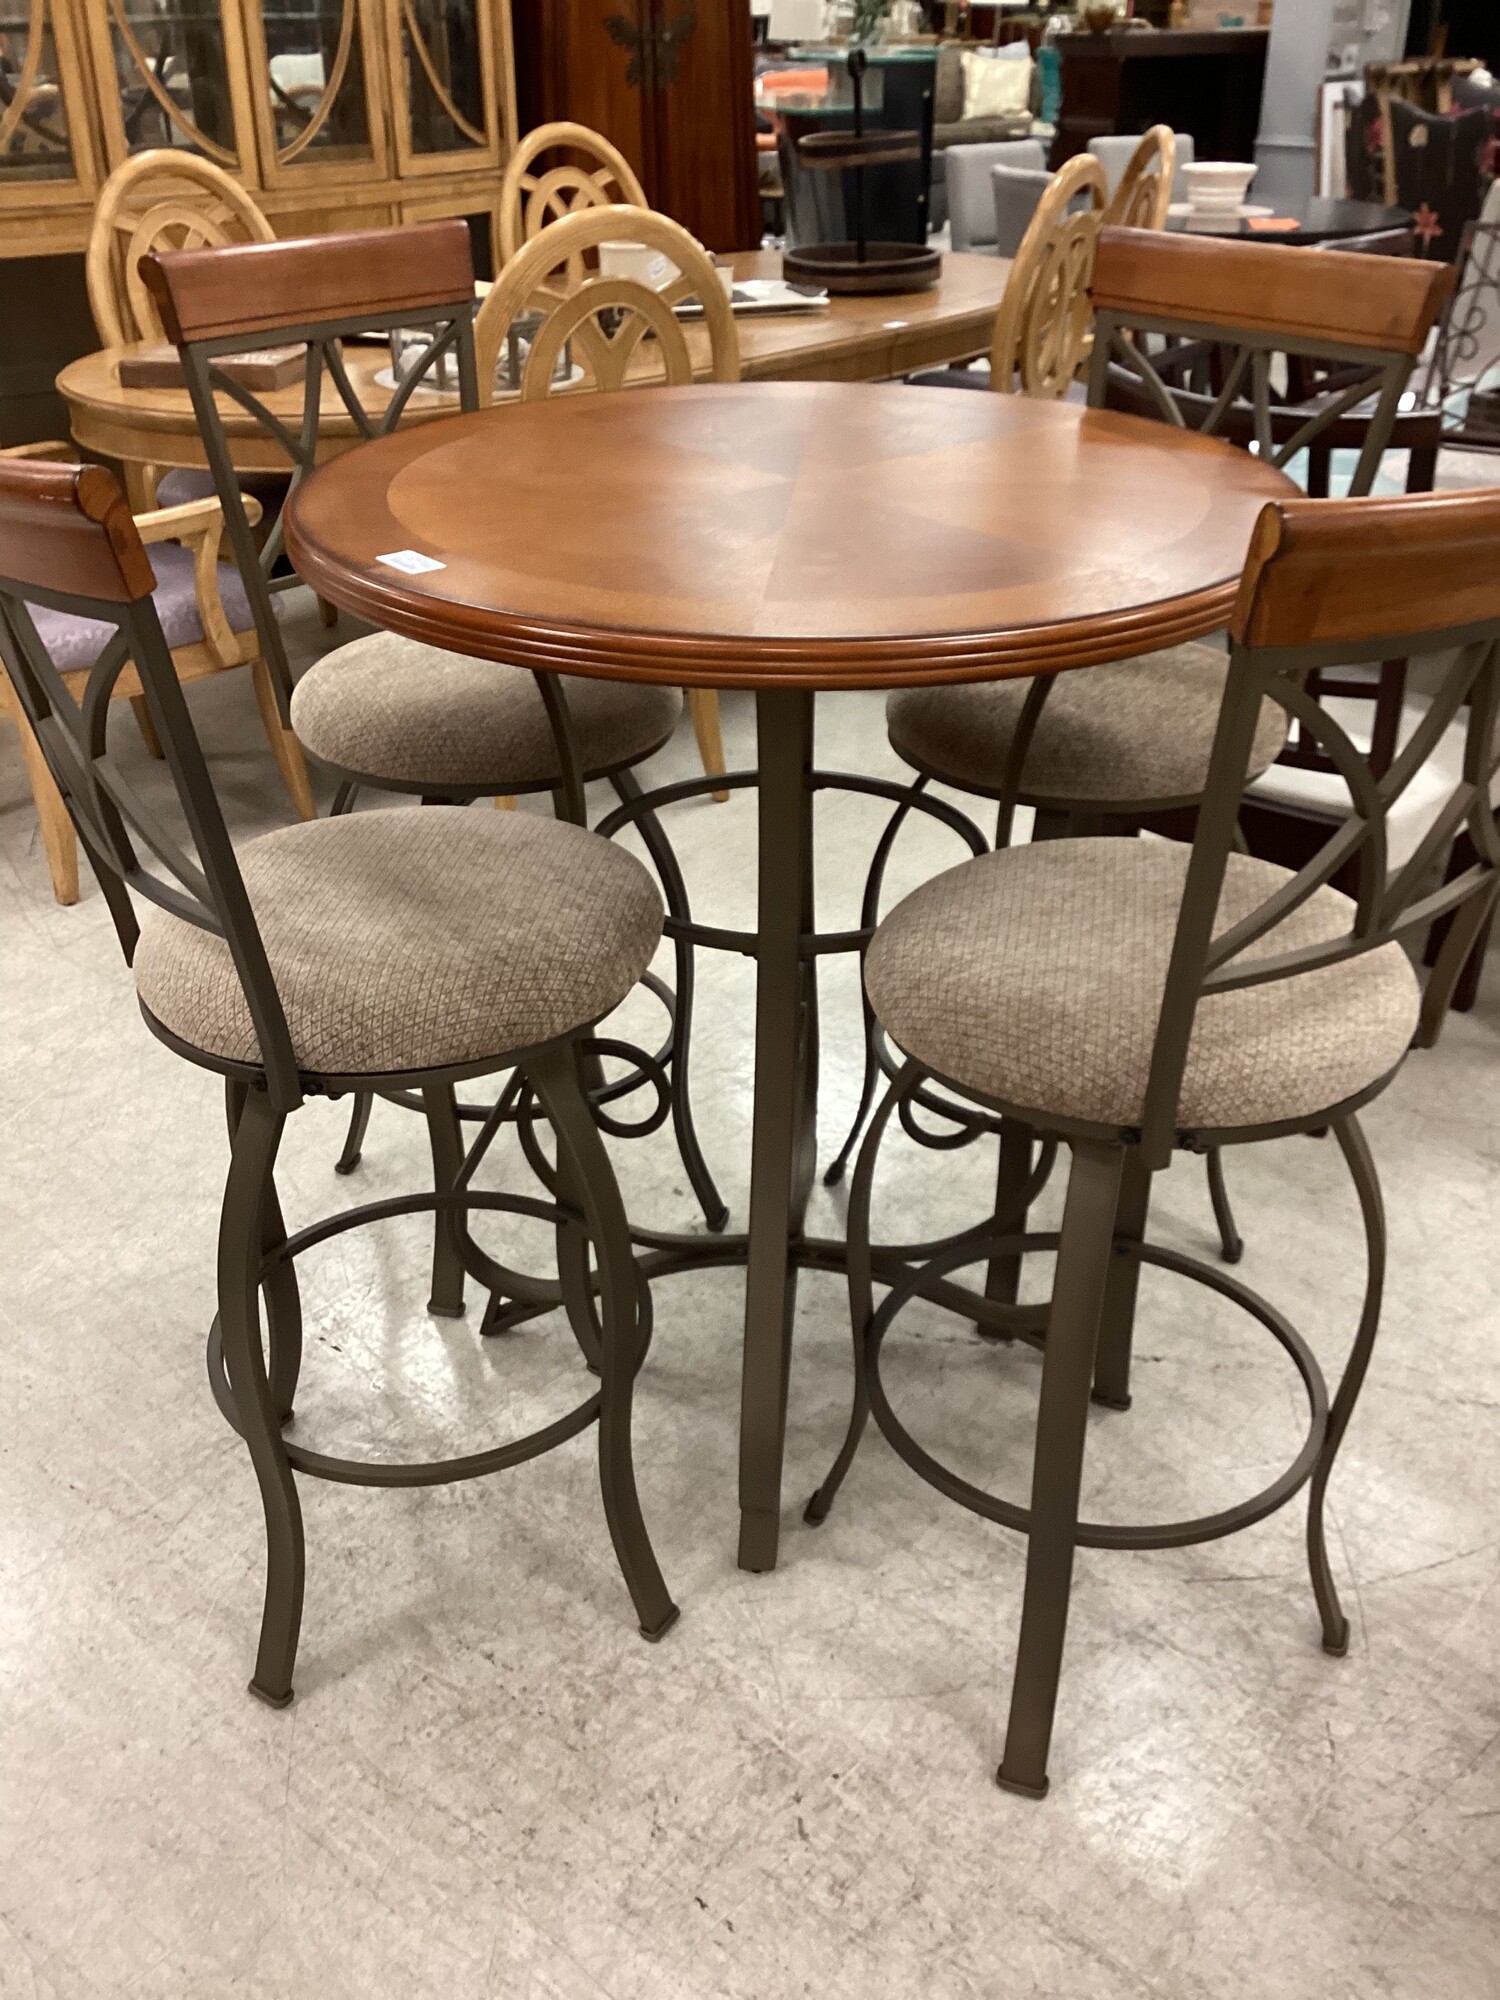 Pub Table+4 Stools, Wood, Tan
36in wide x 40in tall